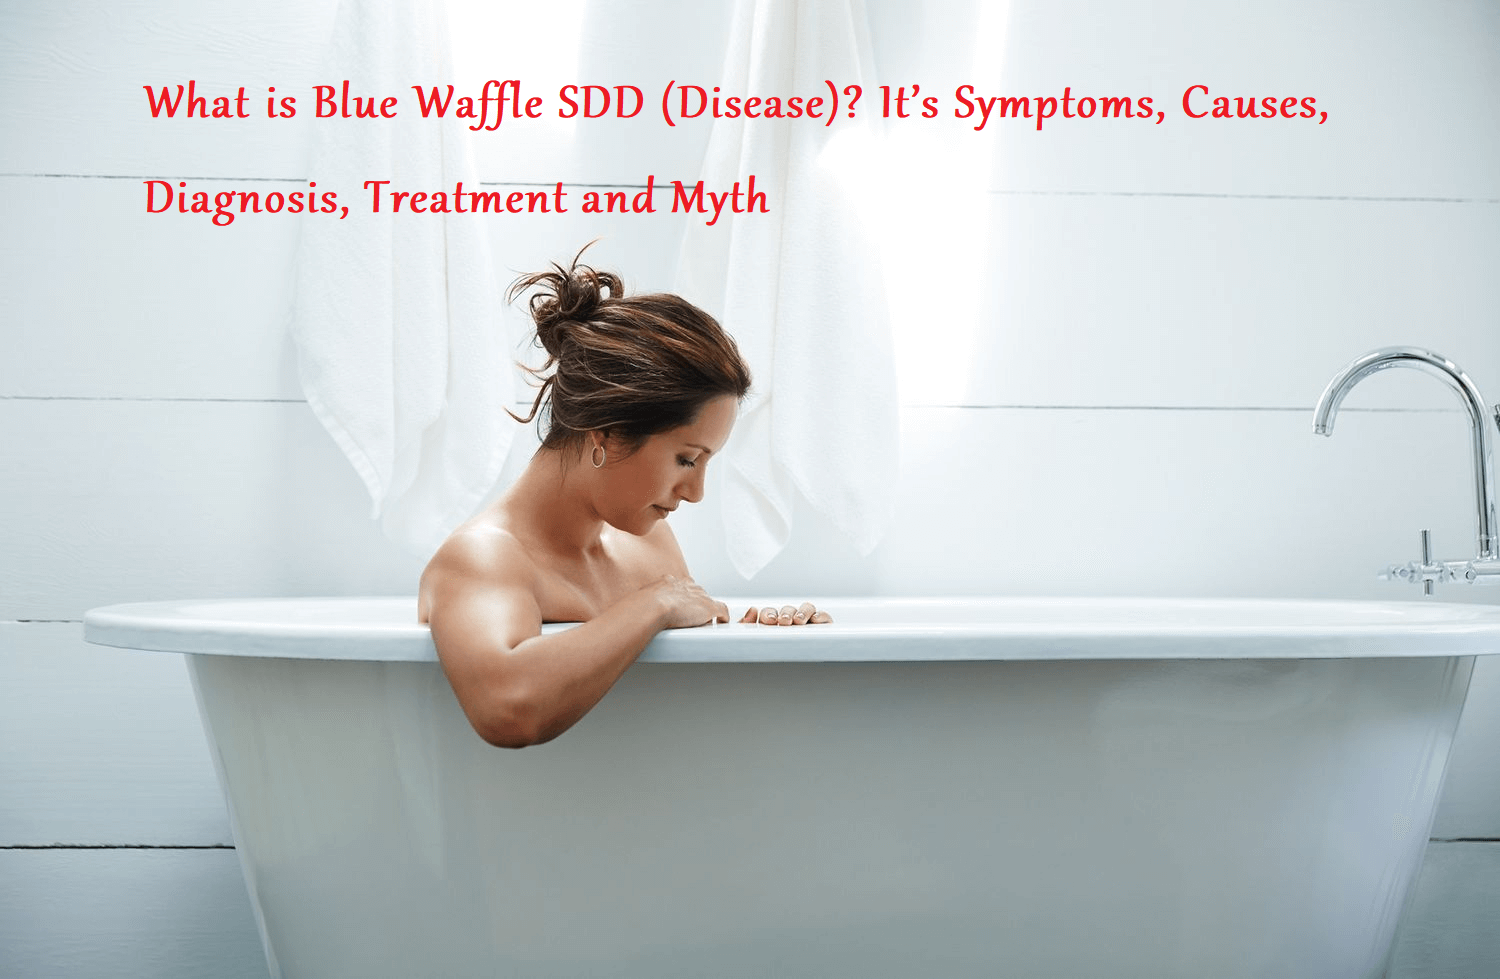 What is Blue Waffle SDD (Disease) It’s Symptoms, Causes, Diagnosis, Treatment and Myth